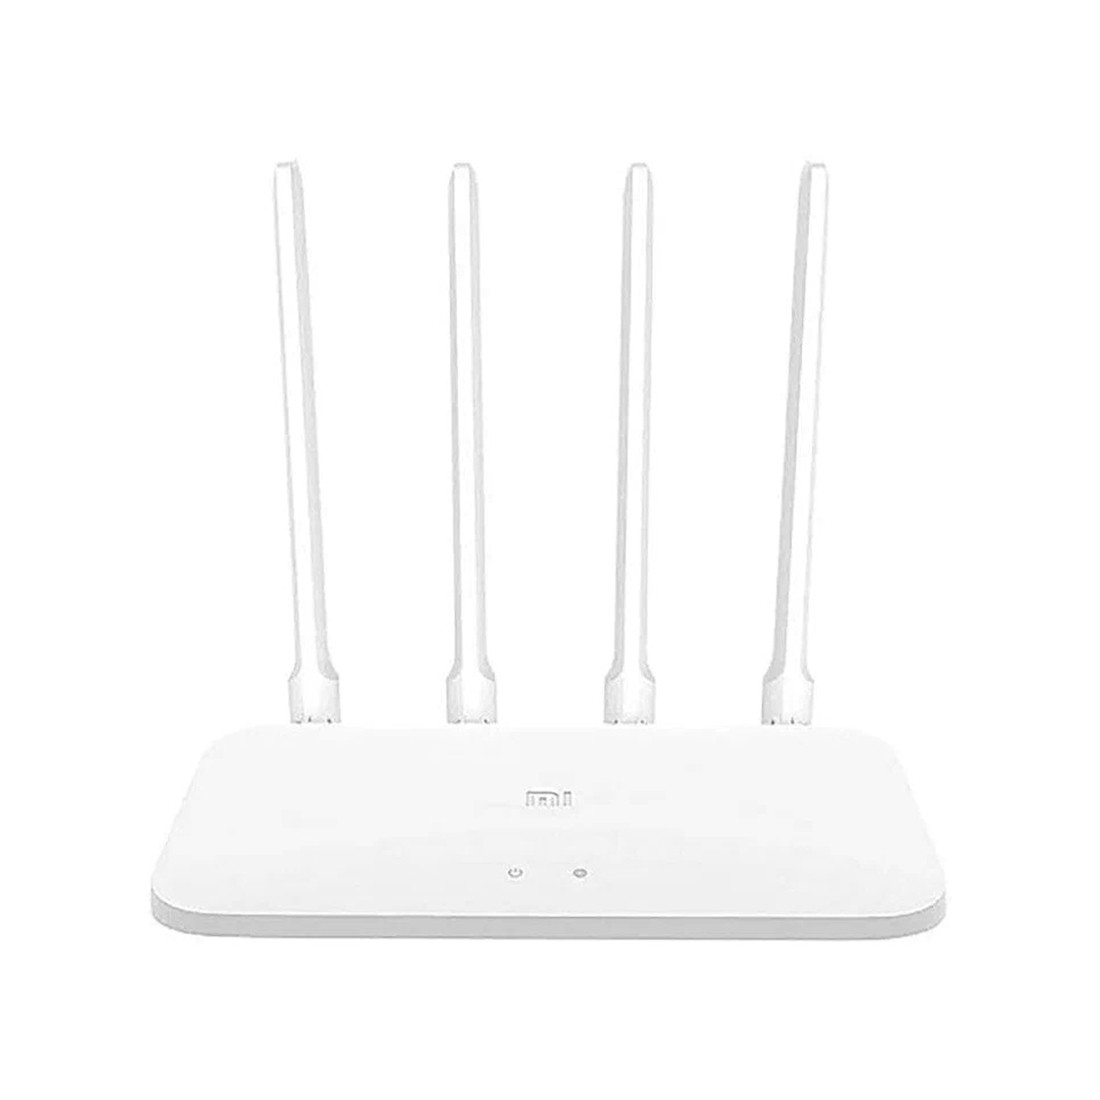 Маршрутизатор Xiaomi Router AC1200 - фото 2 - id-p110824711